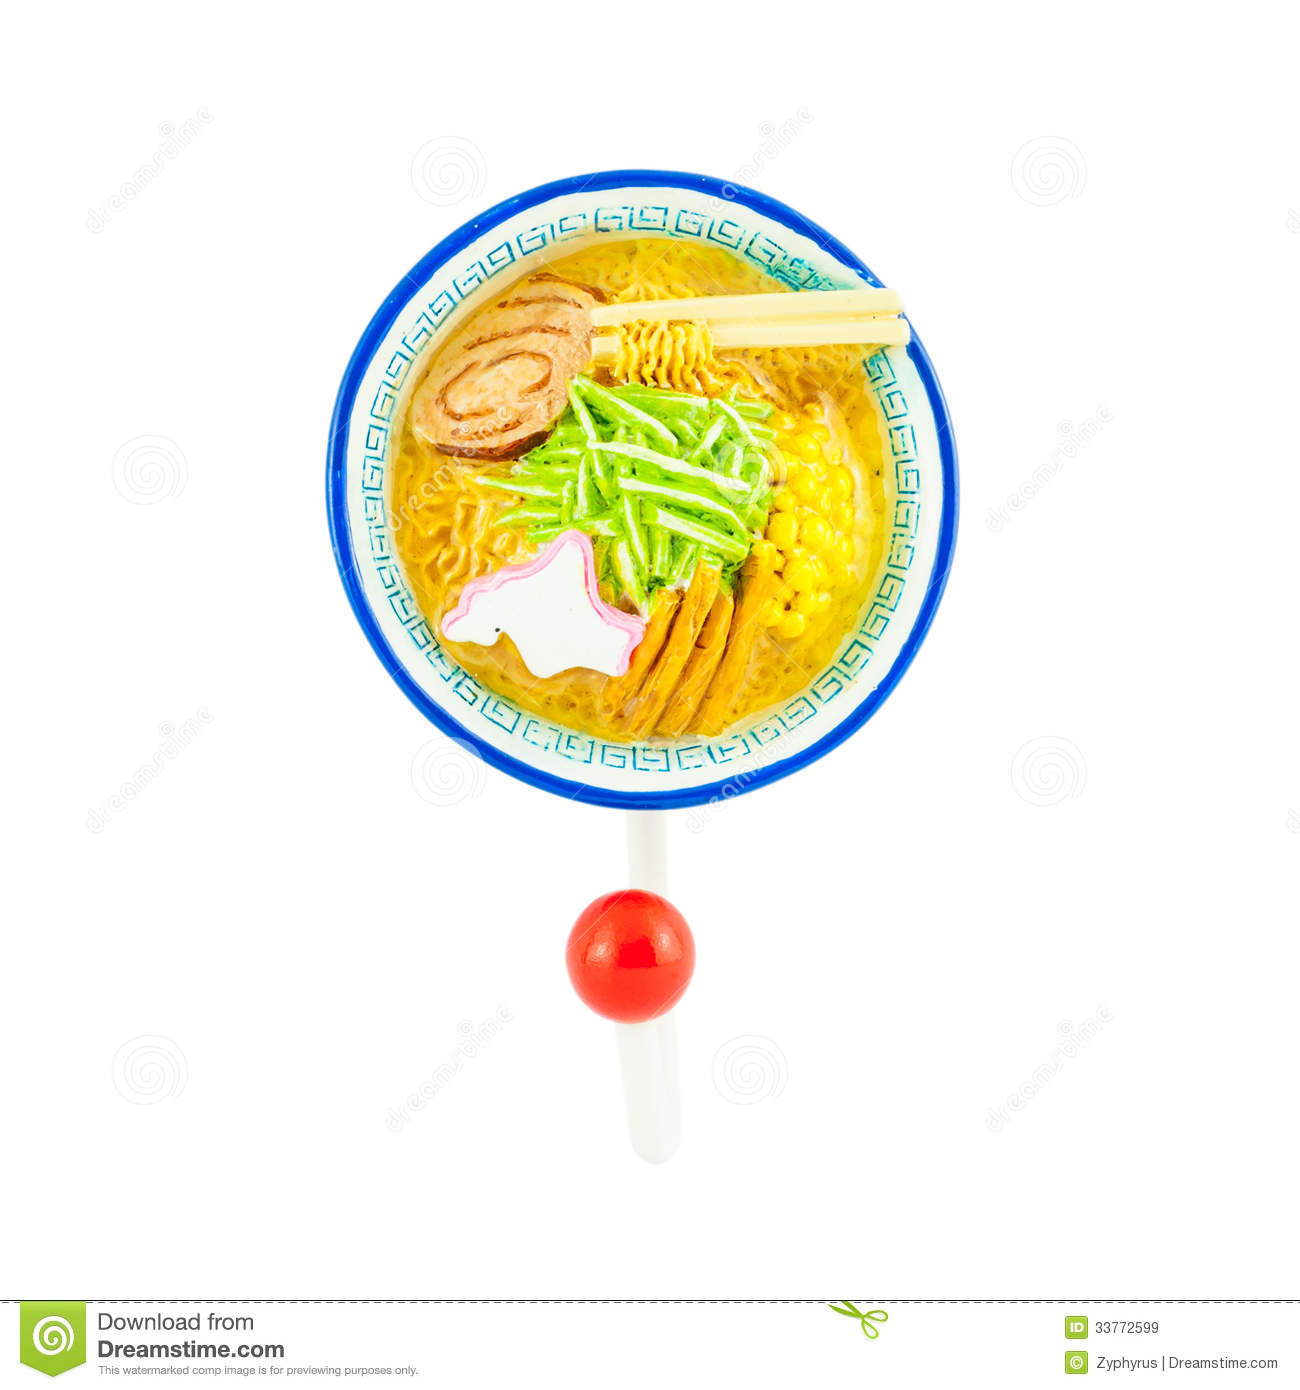 Ramen Noodle Magnet With Hanger Royalty Free Stock Images   Image